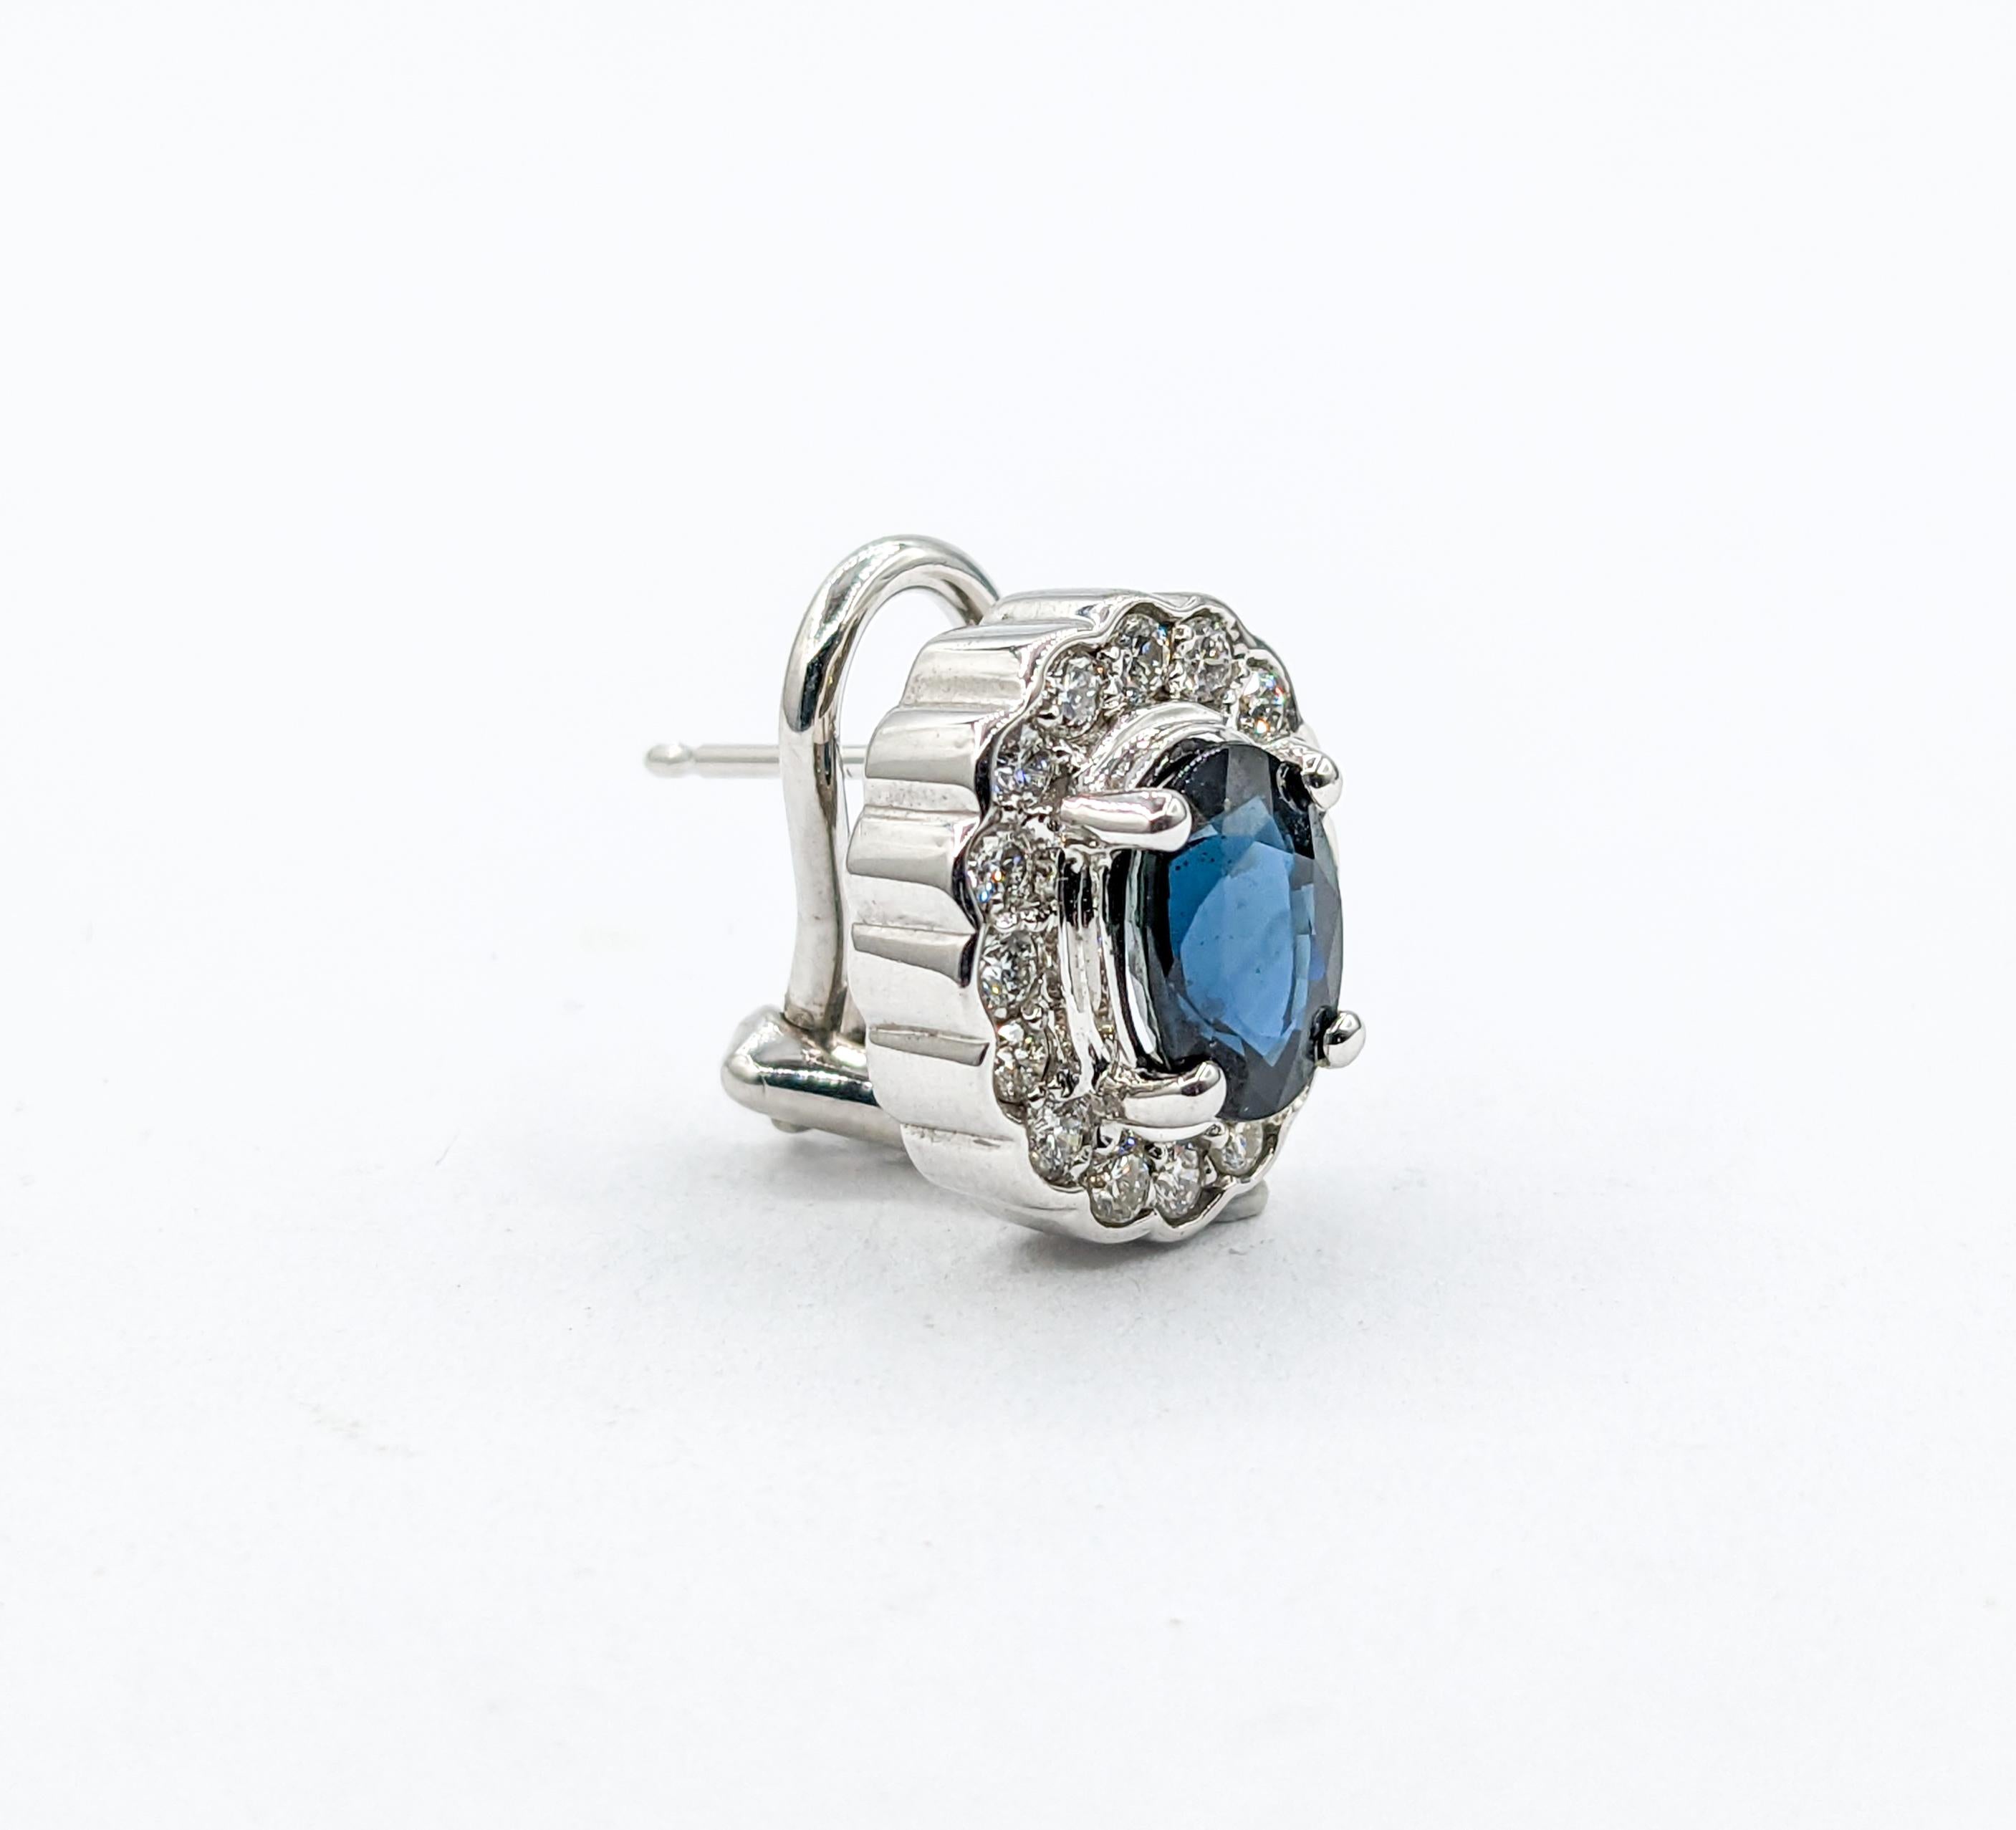 Exquisite Sapphire and White Diamond Earrings In White Gold In Excellent Condition For Sale In Bloomington, MN